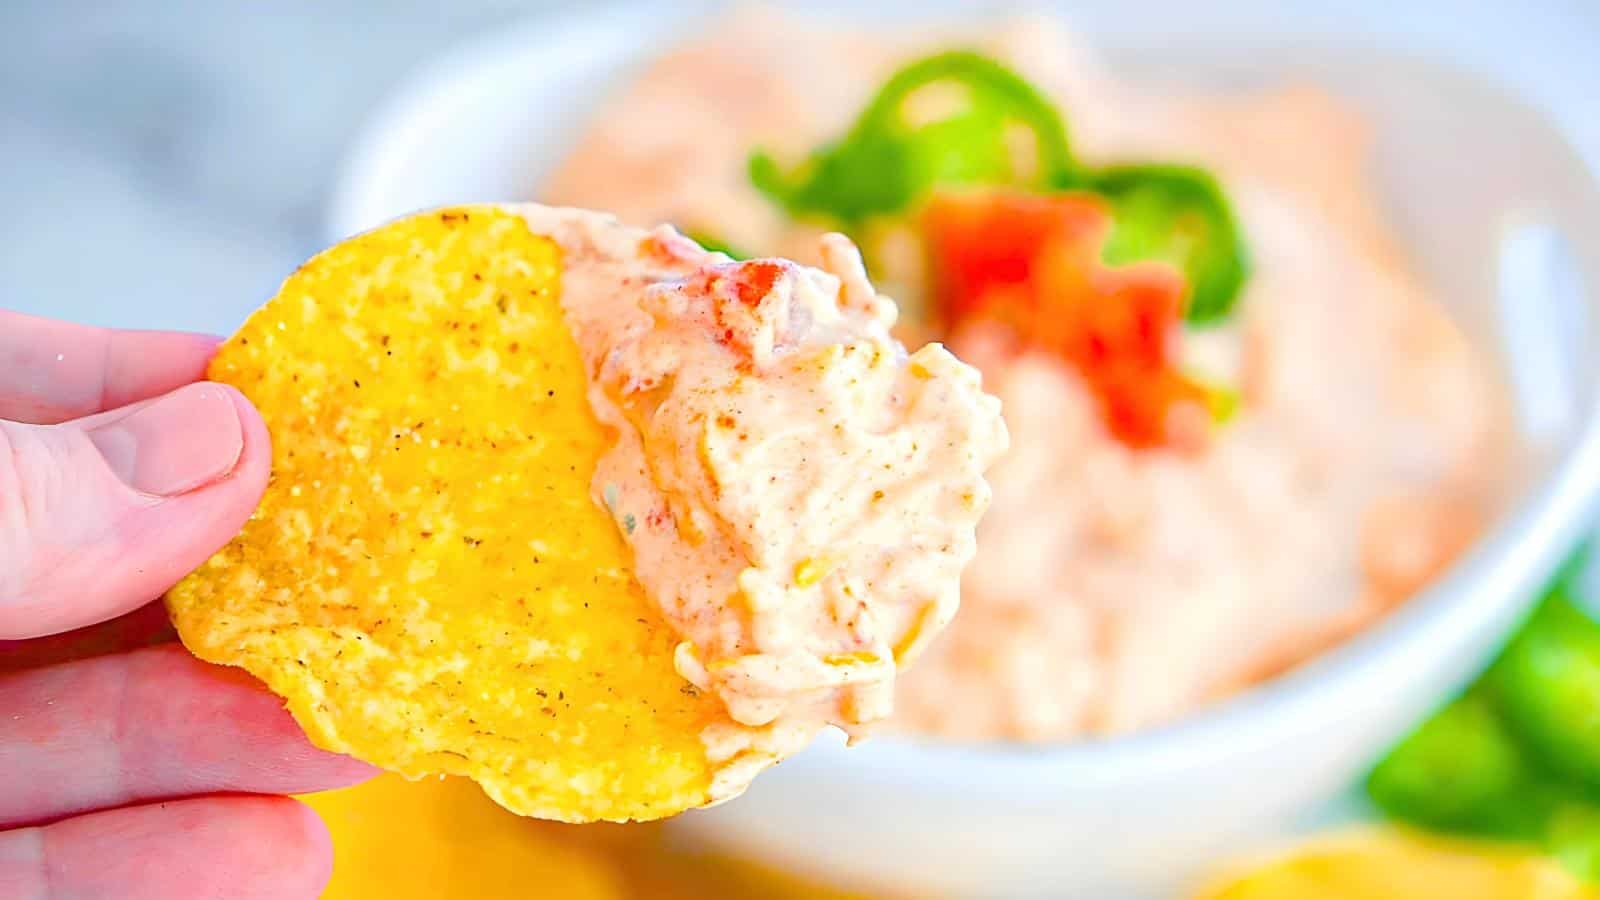 <p>This dip is a great addition to any pool party, offering a flavorful and creamy option that’s perfect for sharing. Quick and easy to prepare, it pairs well with chips or veggies, making it a versatile snack. Its rich taste will keep guests coming back for more, and it’s simple to make in large batches. Serve it in a fun, themed dish to enhance the party atmosphere. This dip is a crowd-pleaser, making it ideal for fun poolside snacking.<br><strong>Get the Recipe: </strong><a href="https://justdiprecipes.com/boat-dip/?utm_source=msn&utm_medium=page&utm_campaign=msn" rel="noopener">Boat Dip Recipe</a></p>